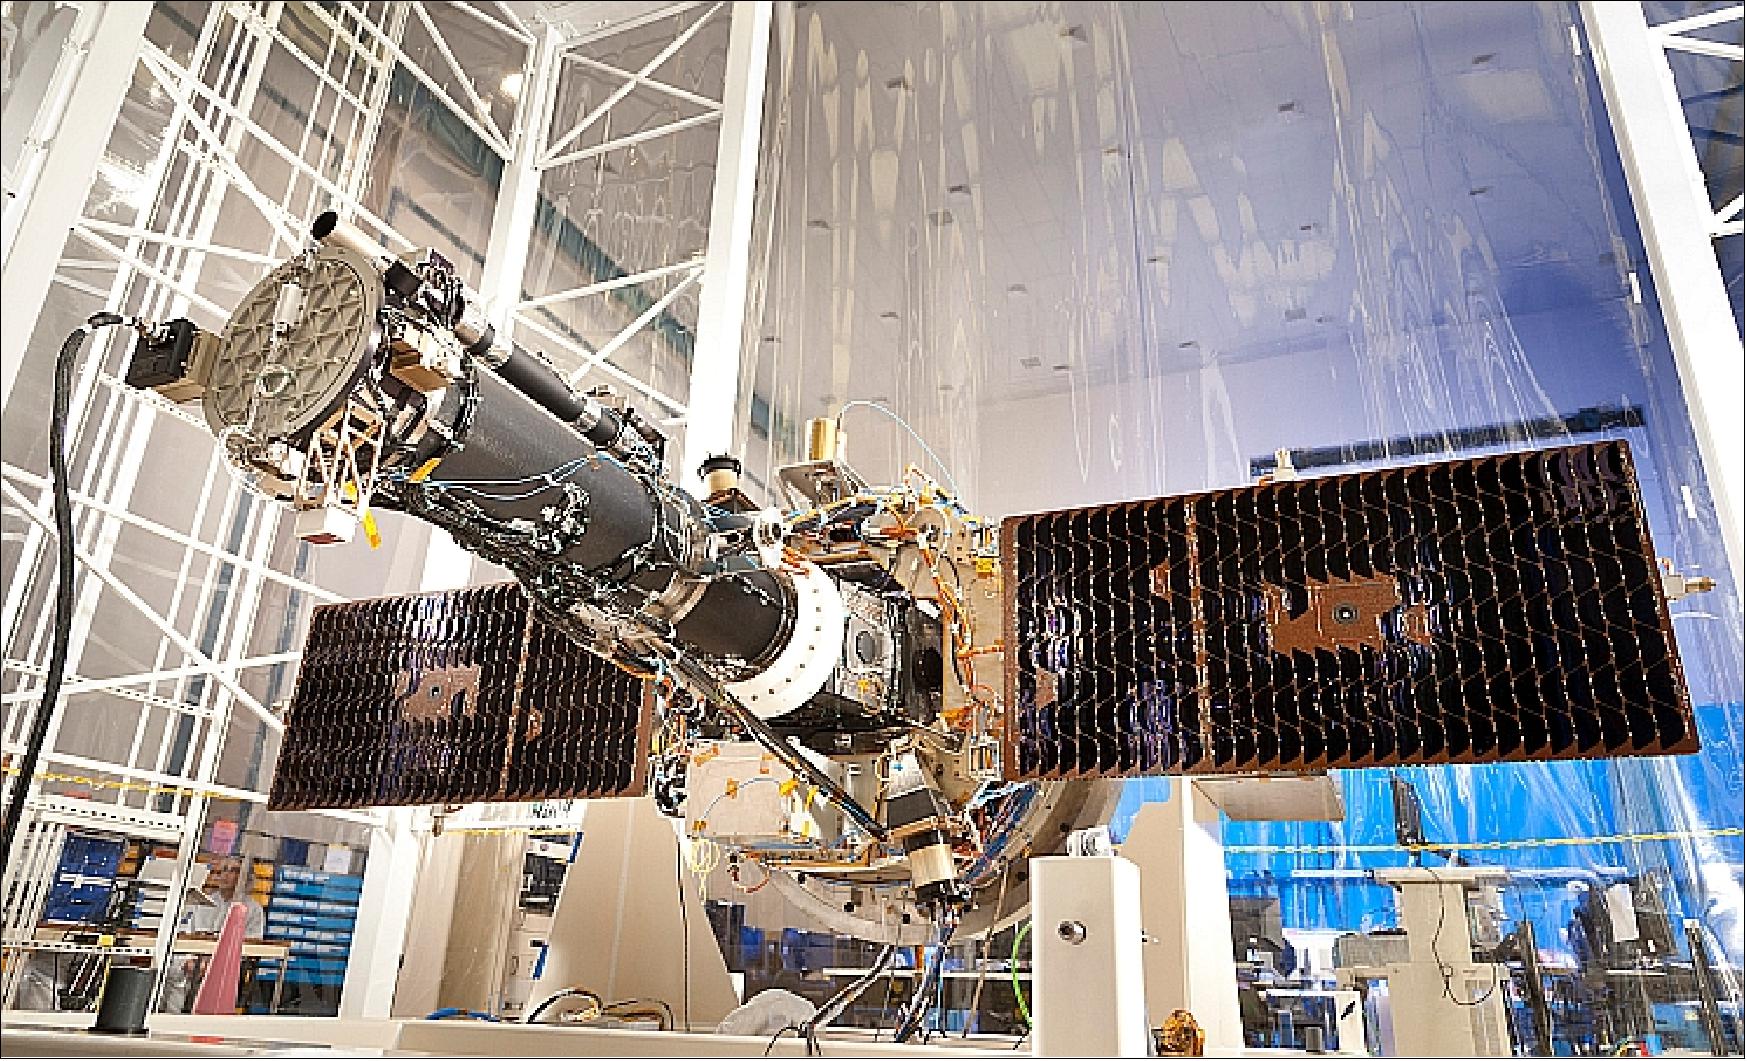 Figure 5: Photo of the fully integrated IRIS spacecraft in a cleanroom of Lockheed Martin Space Systems (image credit: NASA, Lockheed Martin) 11)